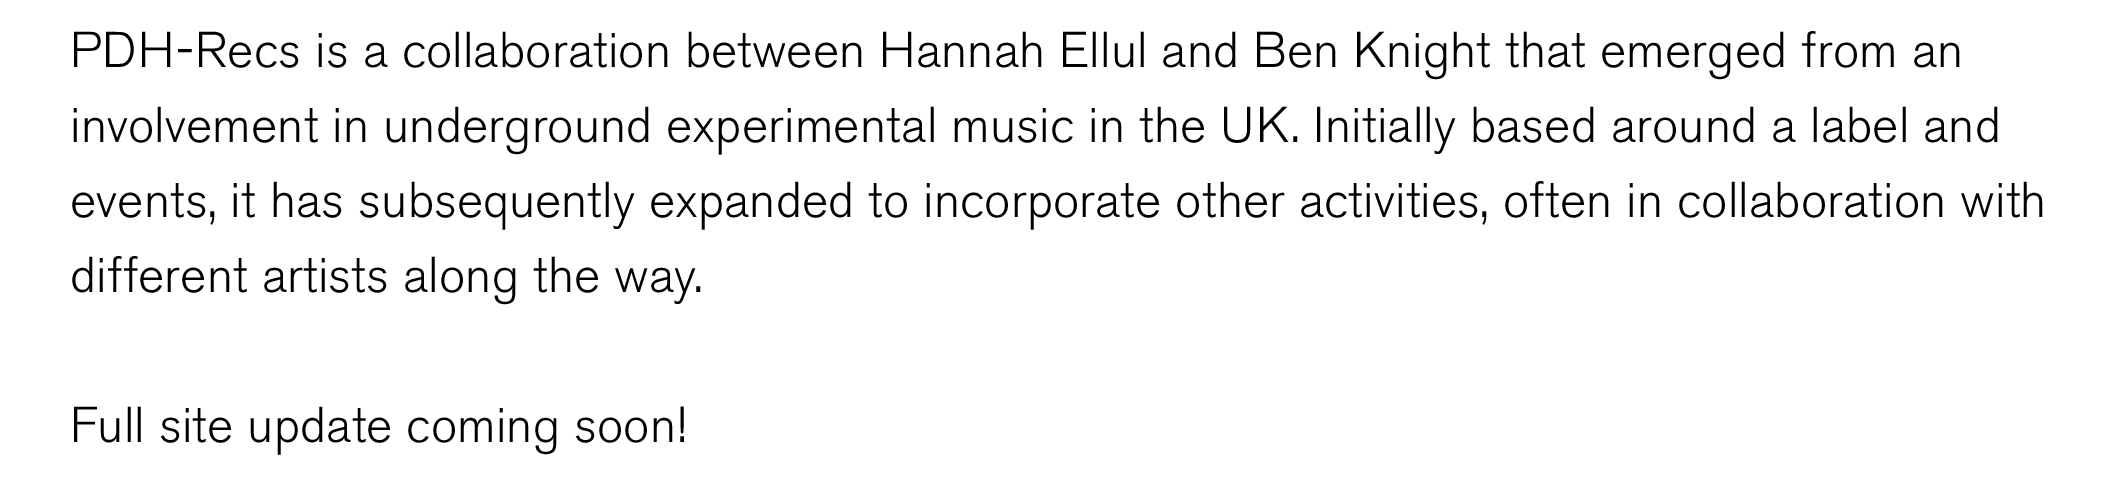 PDH-Recs is a collaboration between Hannah Ellul and Ben Knight that emerged from an 
involvement in underground experimental music in the UK. Initially based around a label and 
events, it has subsequently expanded to incorporate other activities, often in collaboration with 
different artists along the way. 

Full site coming soon!